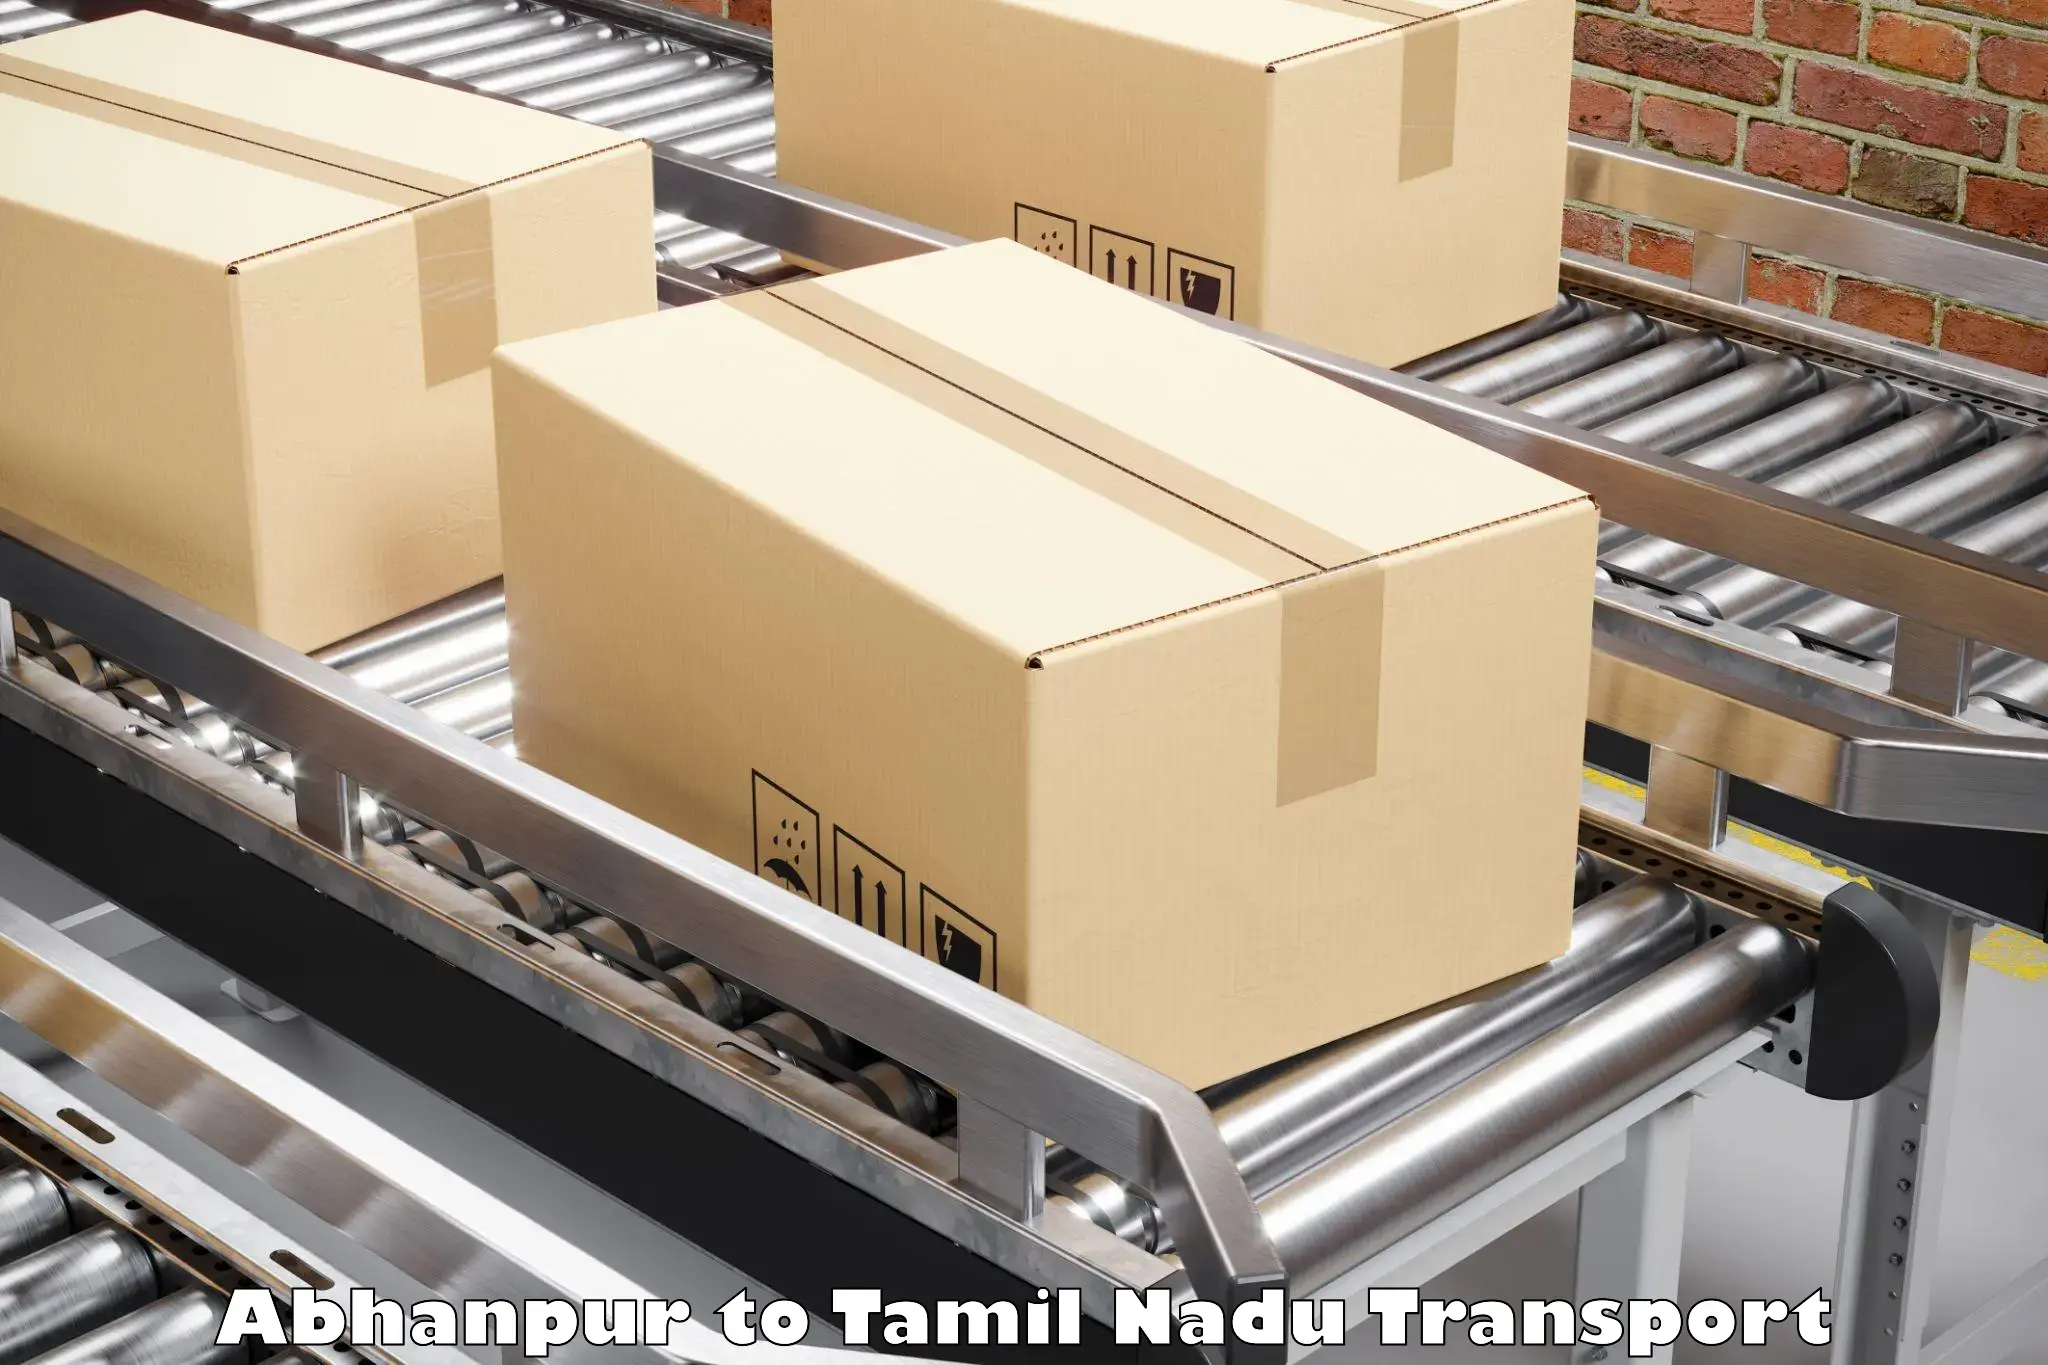 Nationwide transport services Abhanpur to Saveetha Institute of Medical and Technical Sciences Chennai